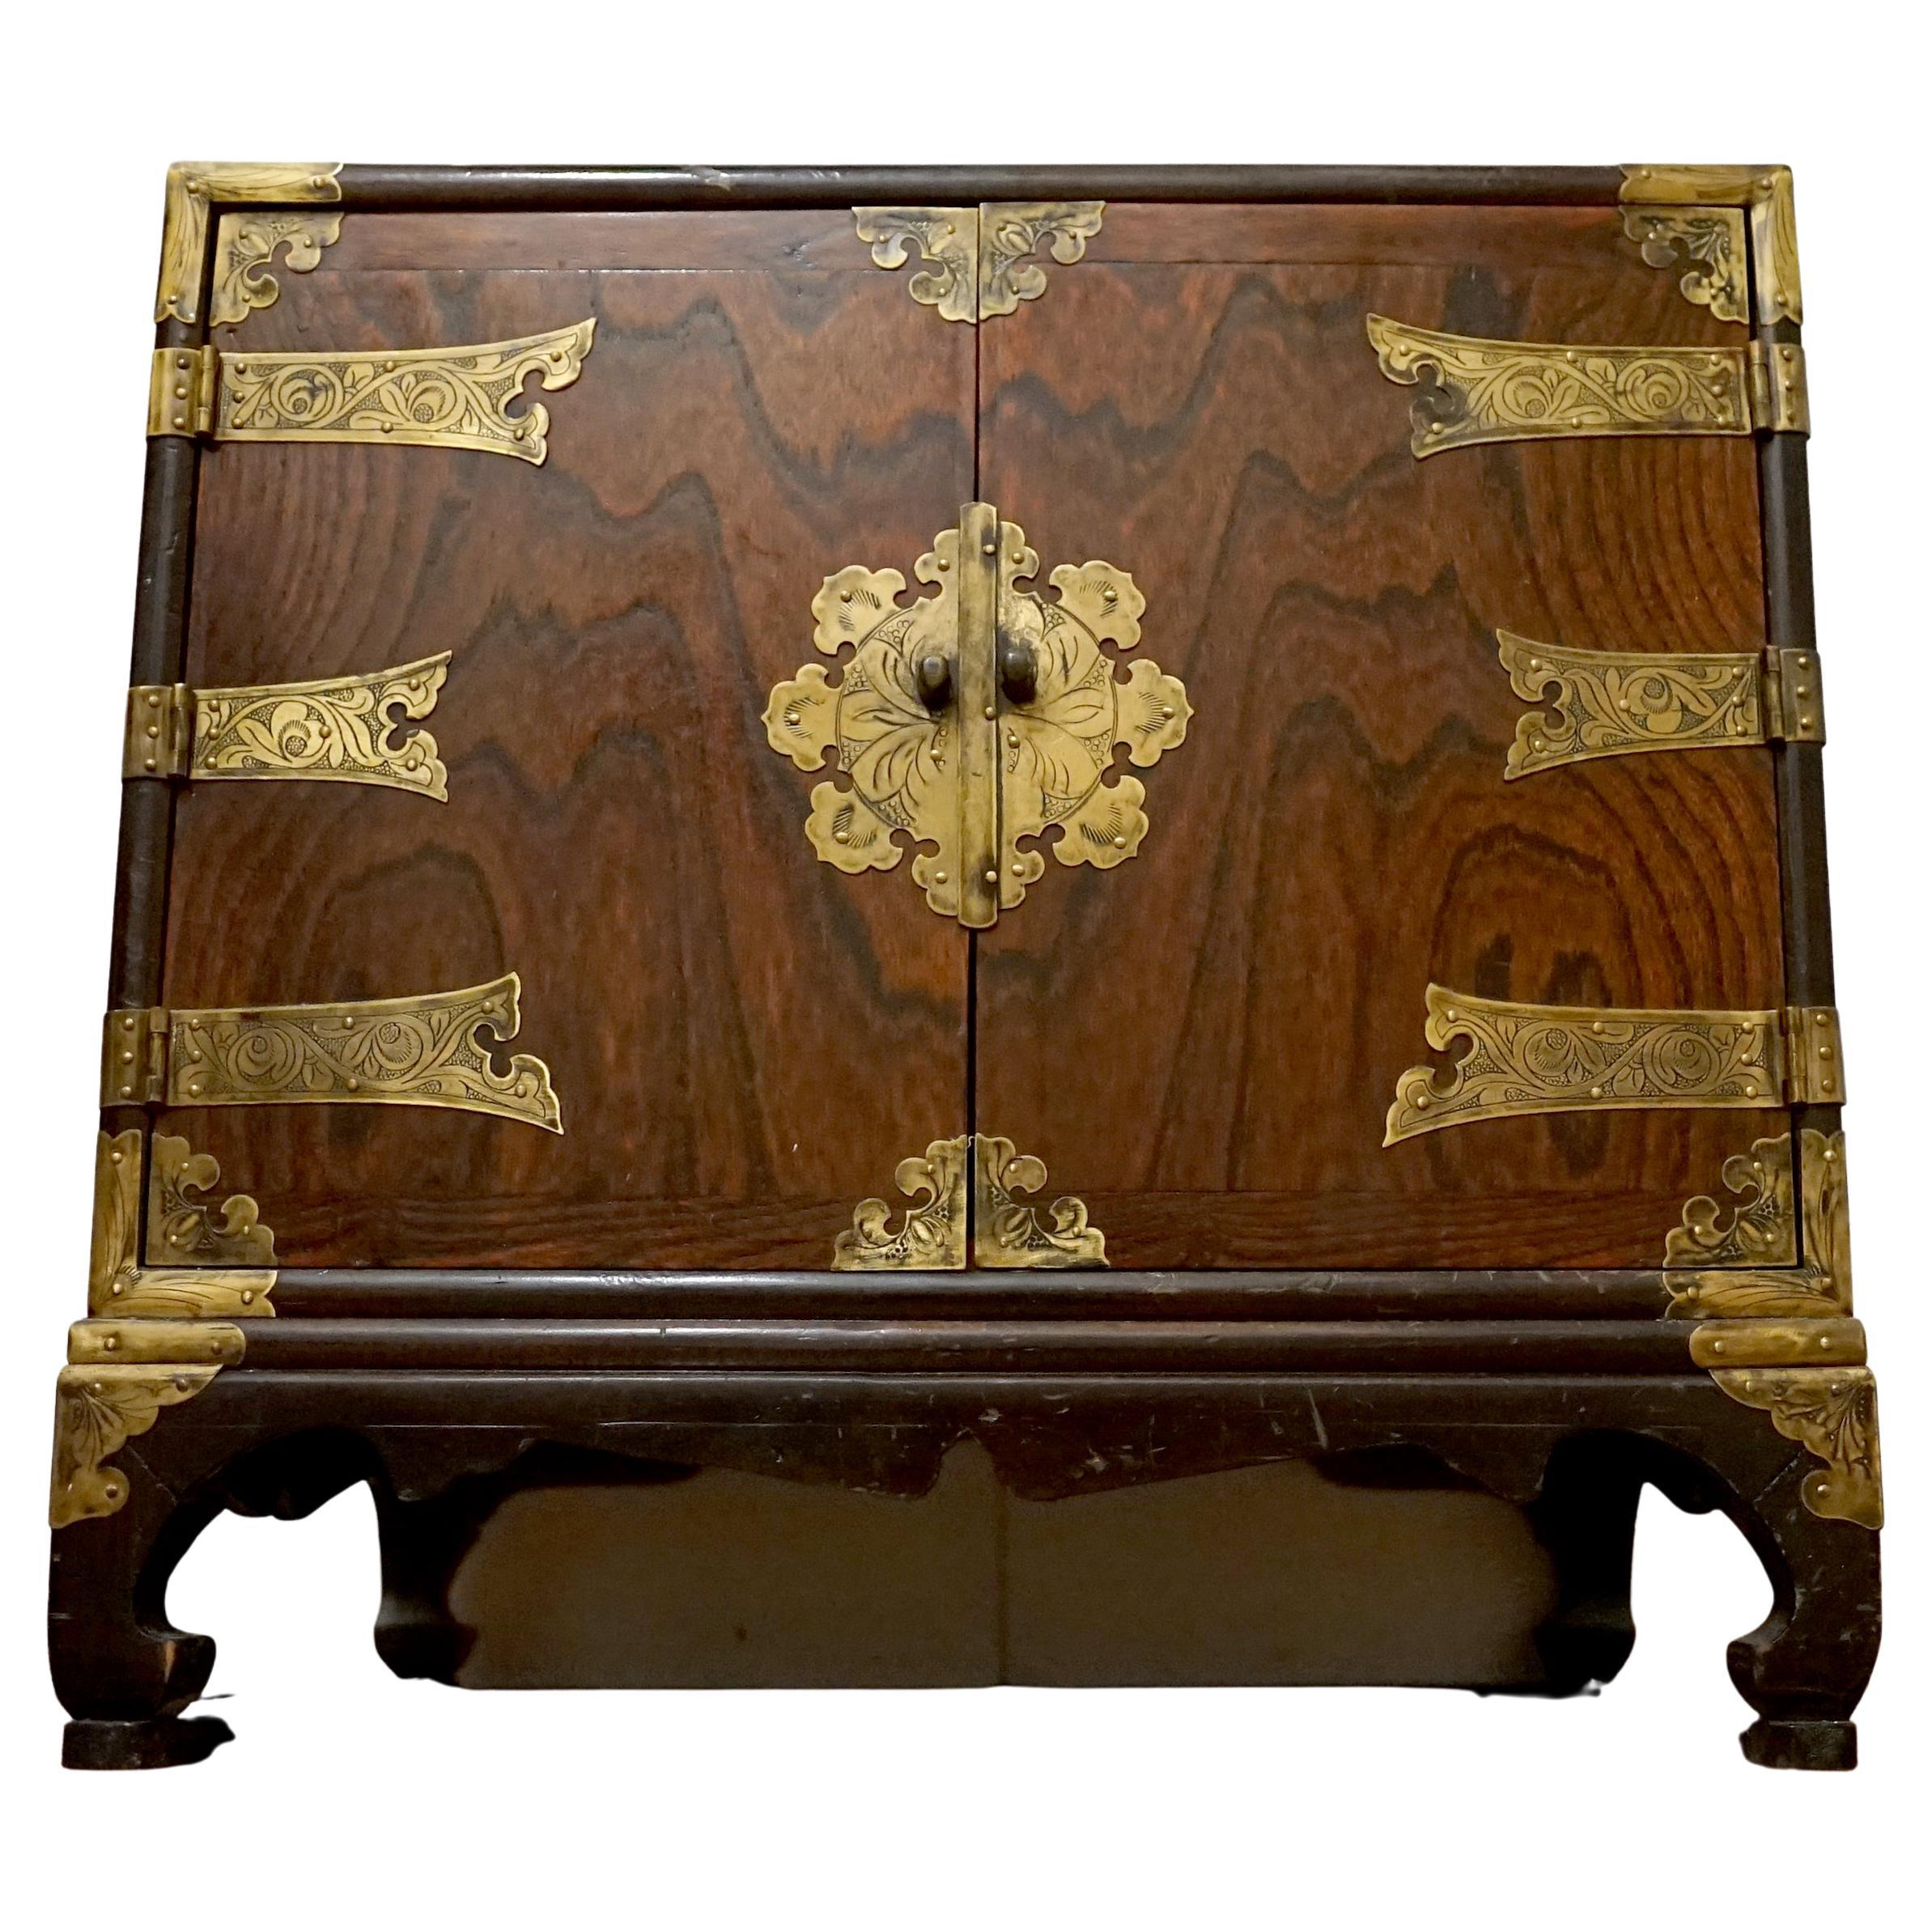 This is a unique Japanese Tansu chest that presents beautifully and also offers a glimpse into history through its design. The inside of the cabinet and the back side are covered in Chinese calligraphy that retraces conflict between the private